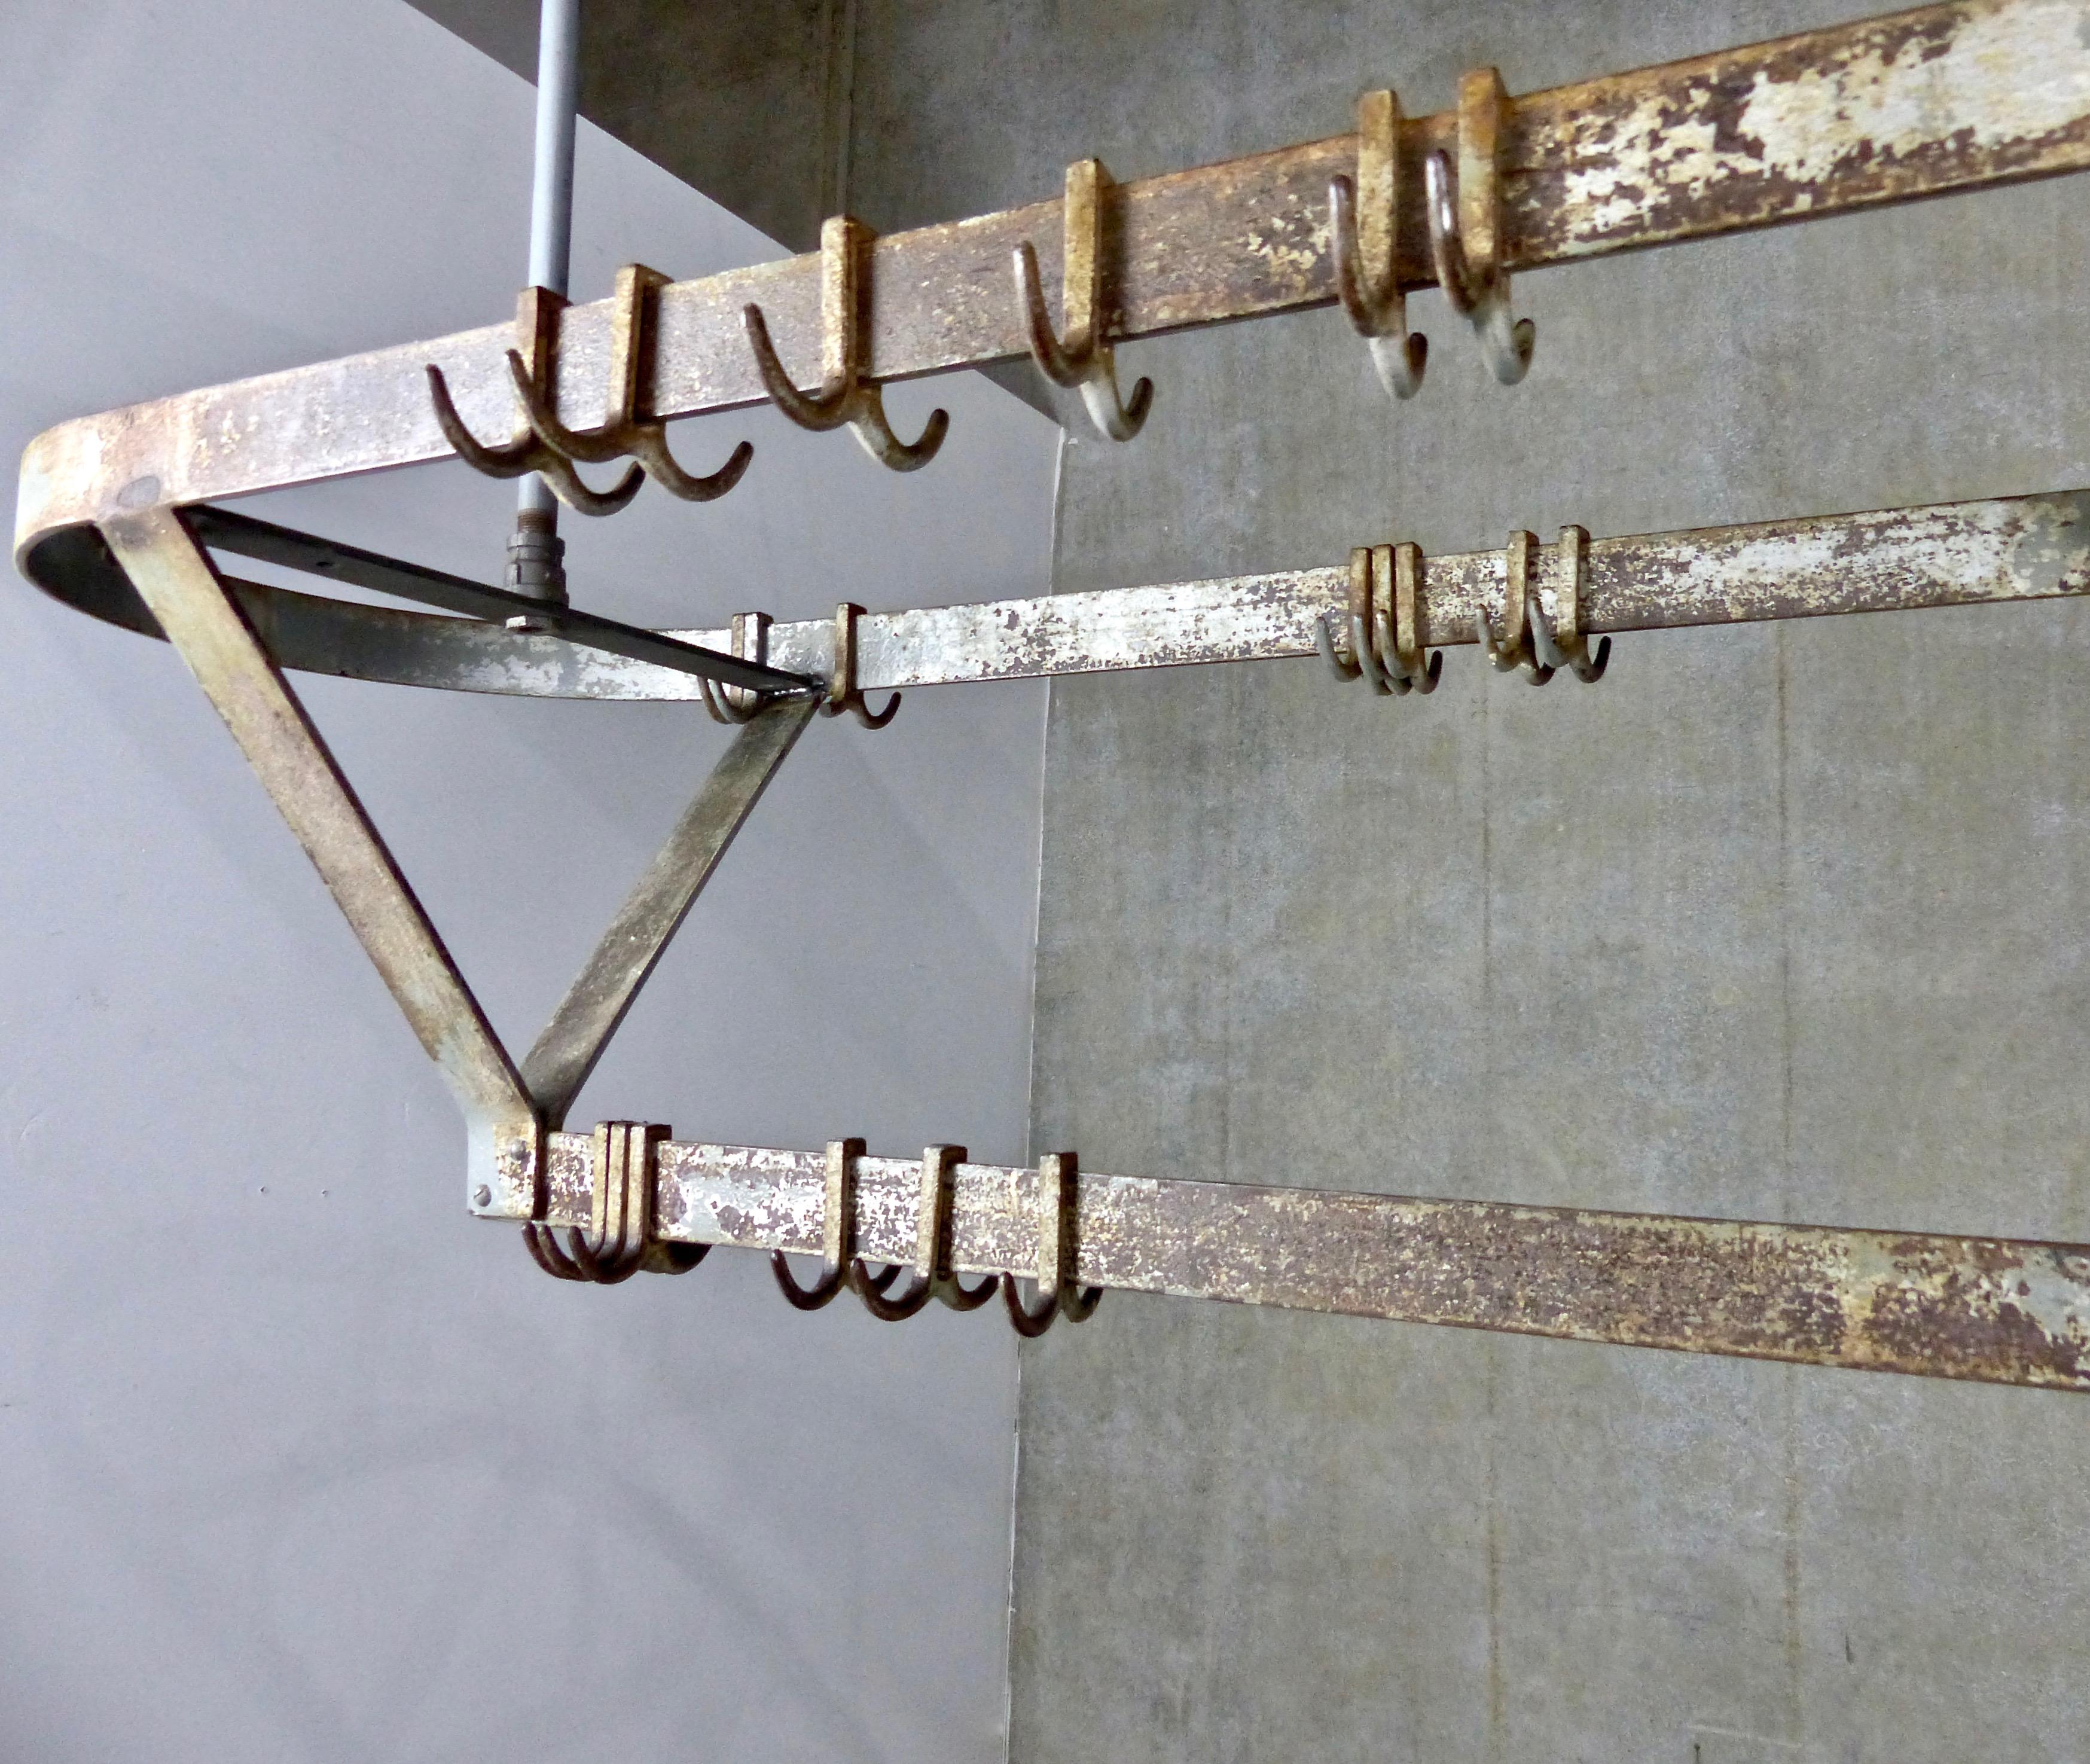 Beautifully patinated, French forged and riveted iron pot rack/holder. Comes complete with its original iron hooks (for hanging pots, etc.) Ceiling mounted; height can be adjusted. An extraordinary showpiece for your kitchen!
Dimensions: 48 H” x 48